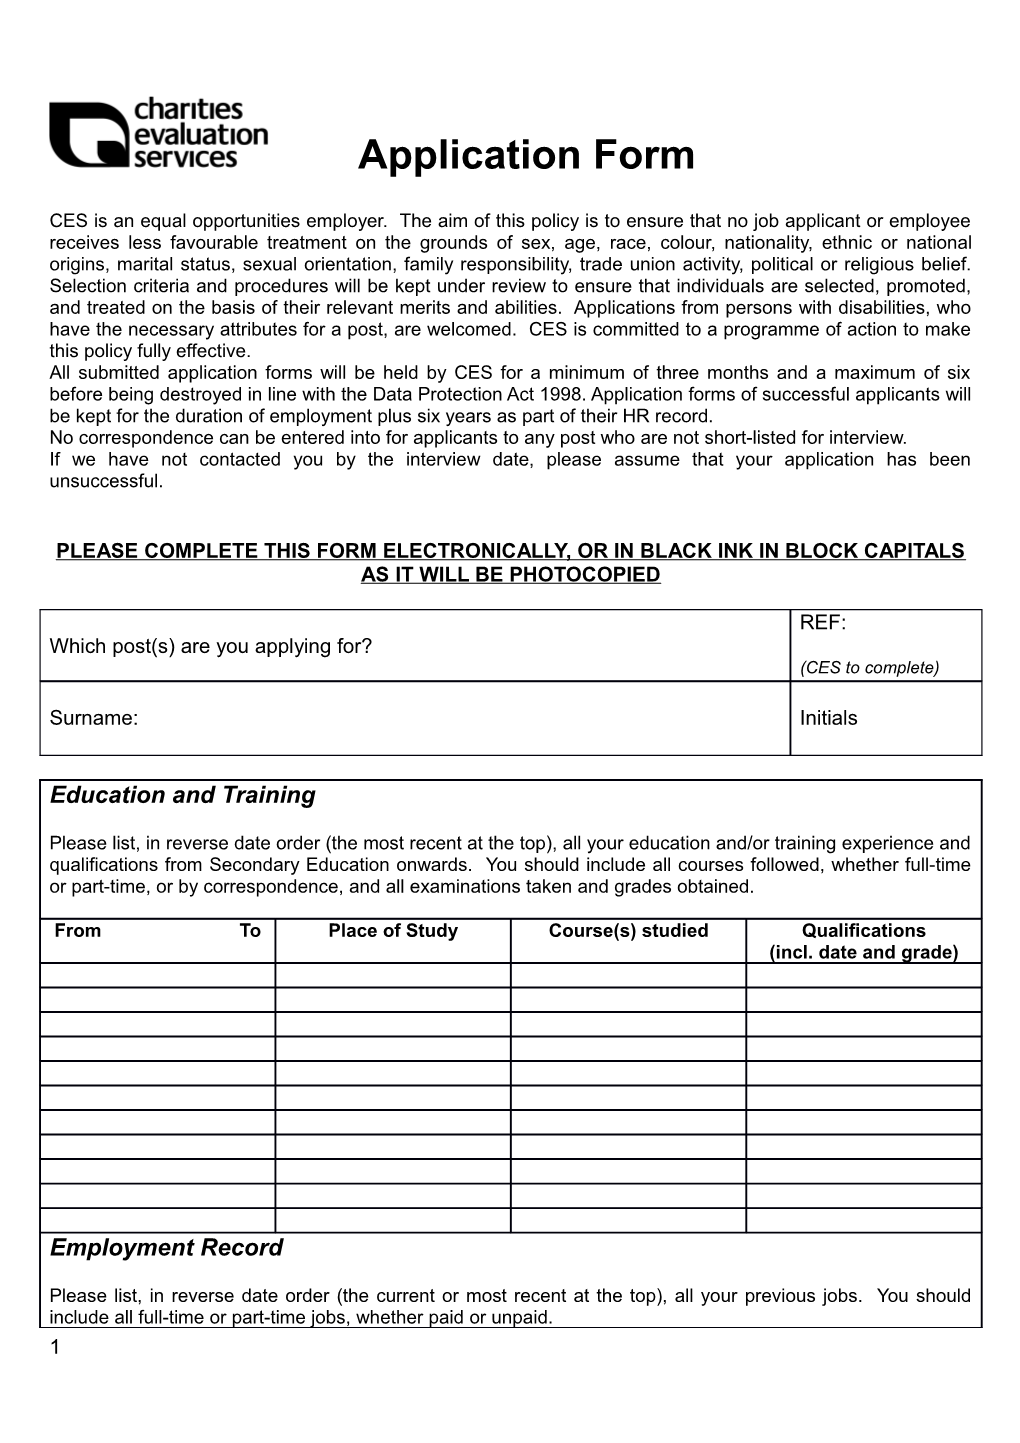 Charities Evaluation Services Application Form